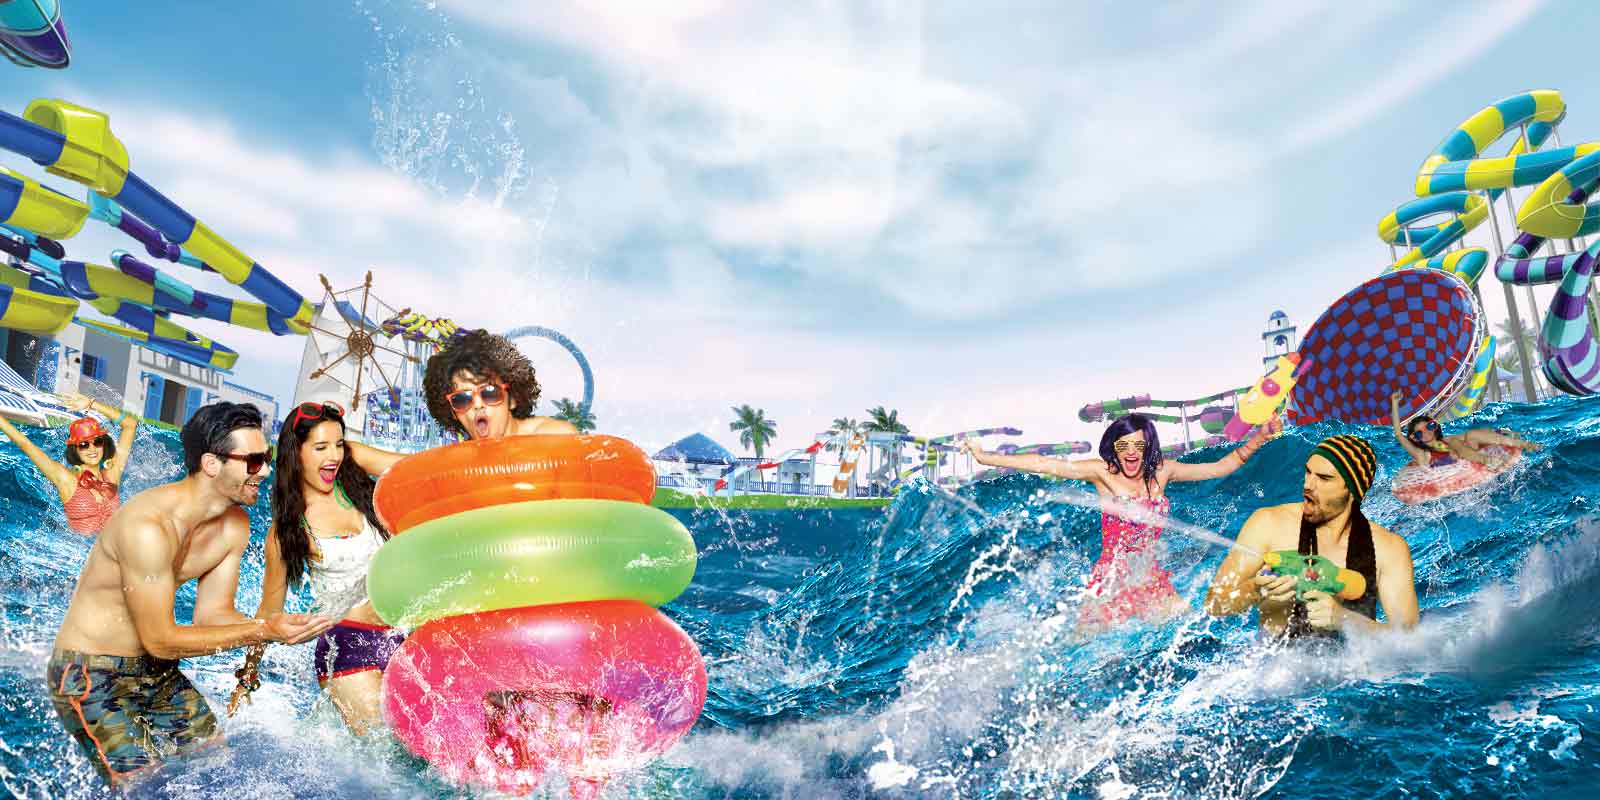 plan a trip to a water park with your family to take a plunge in the cool w...